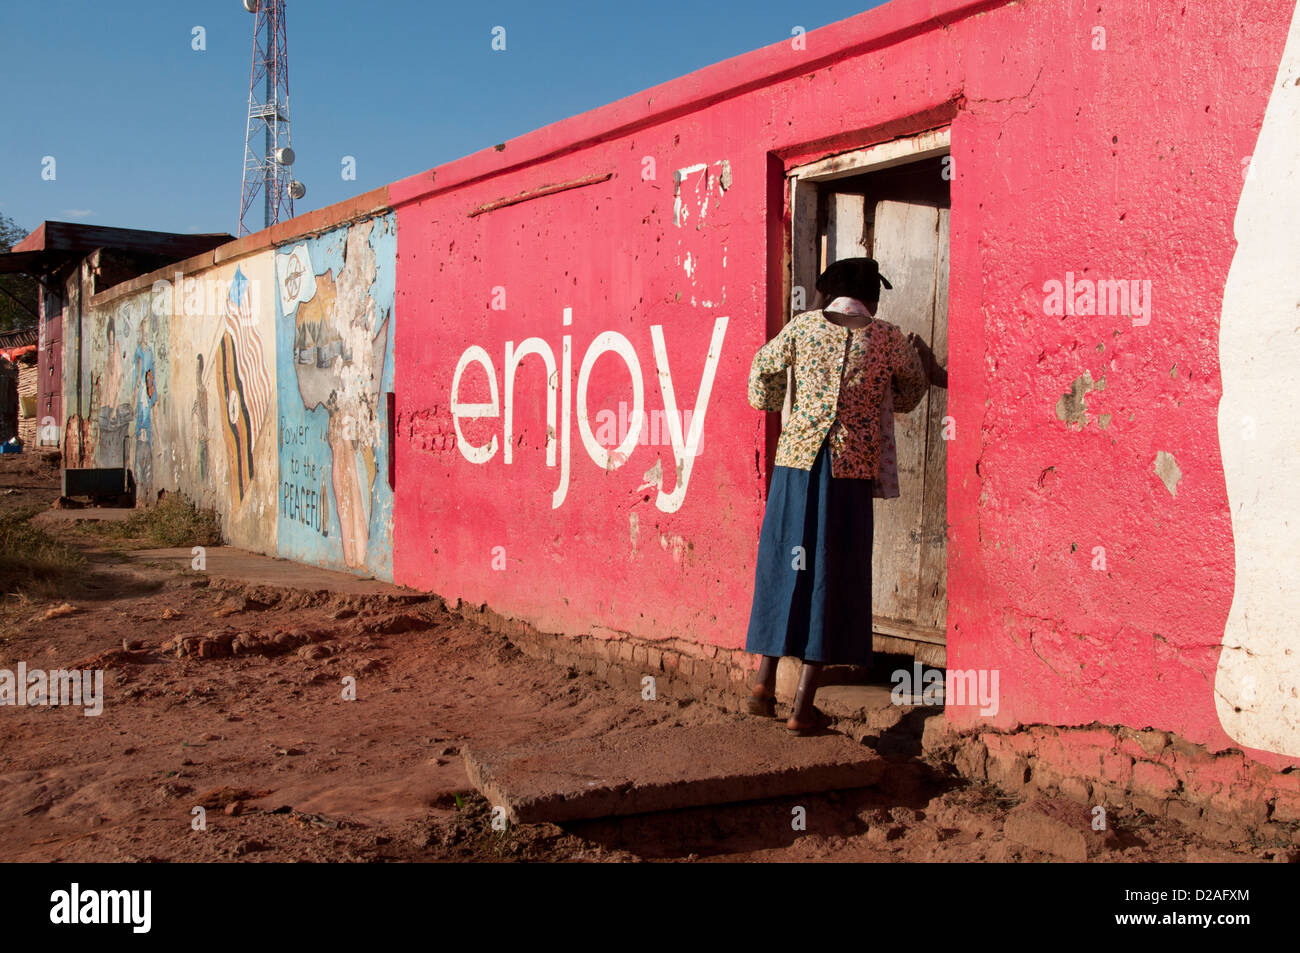 Uganda, Gulu. A woman goes into a door set in a red wall with Enjoy painted on it Stock Photo